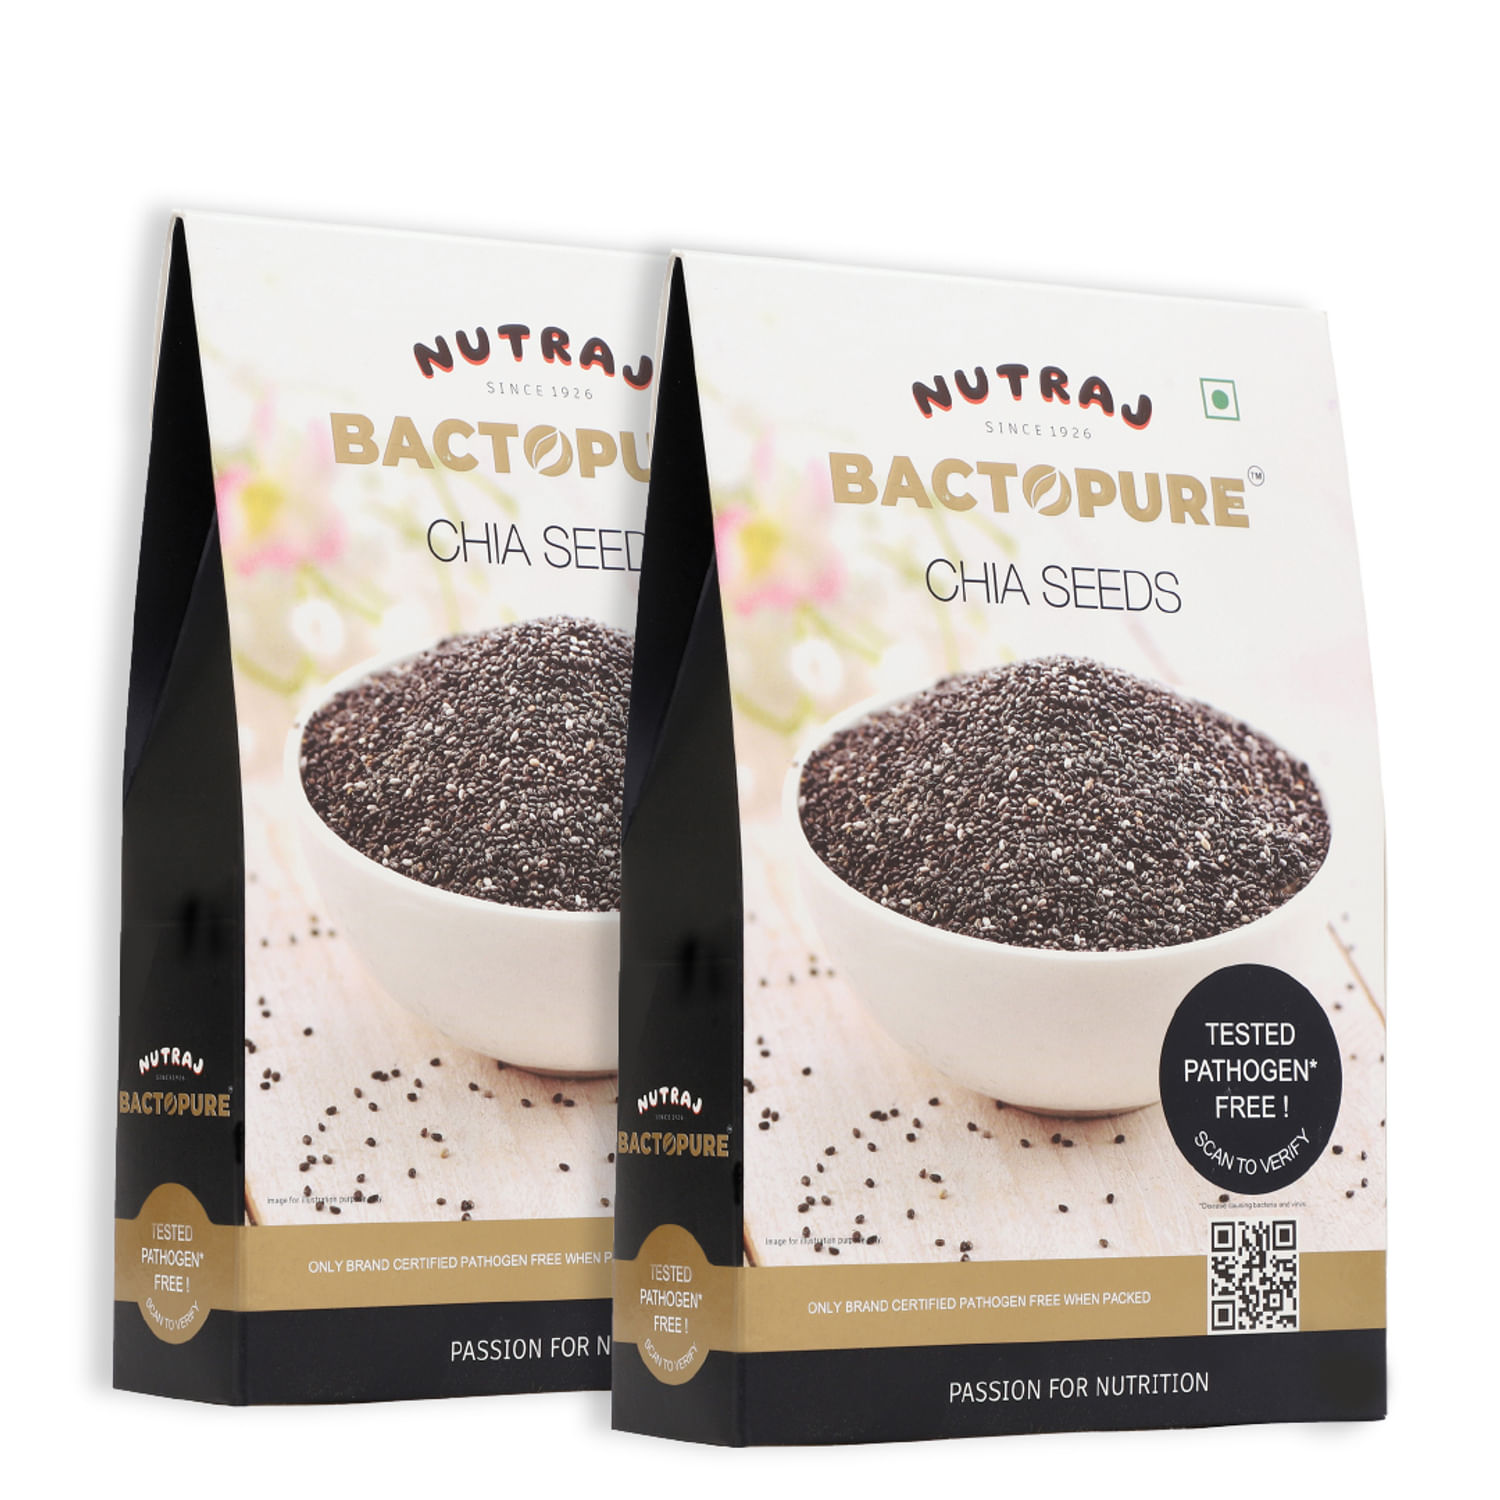 Bactopure Chia Seeds 200 gm - Pack of 2